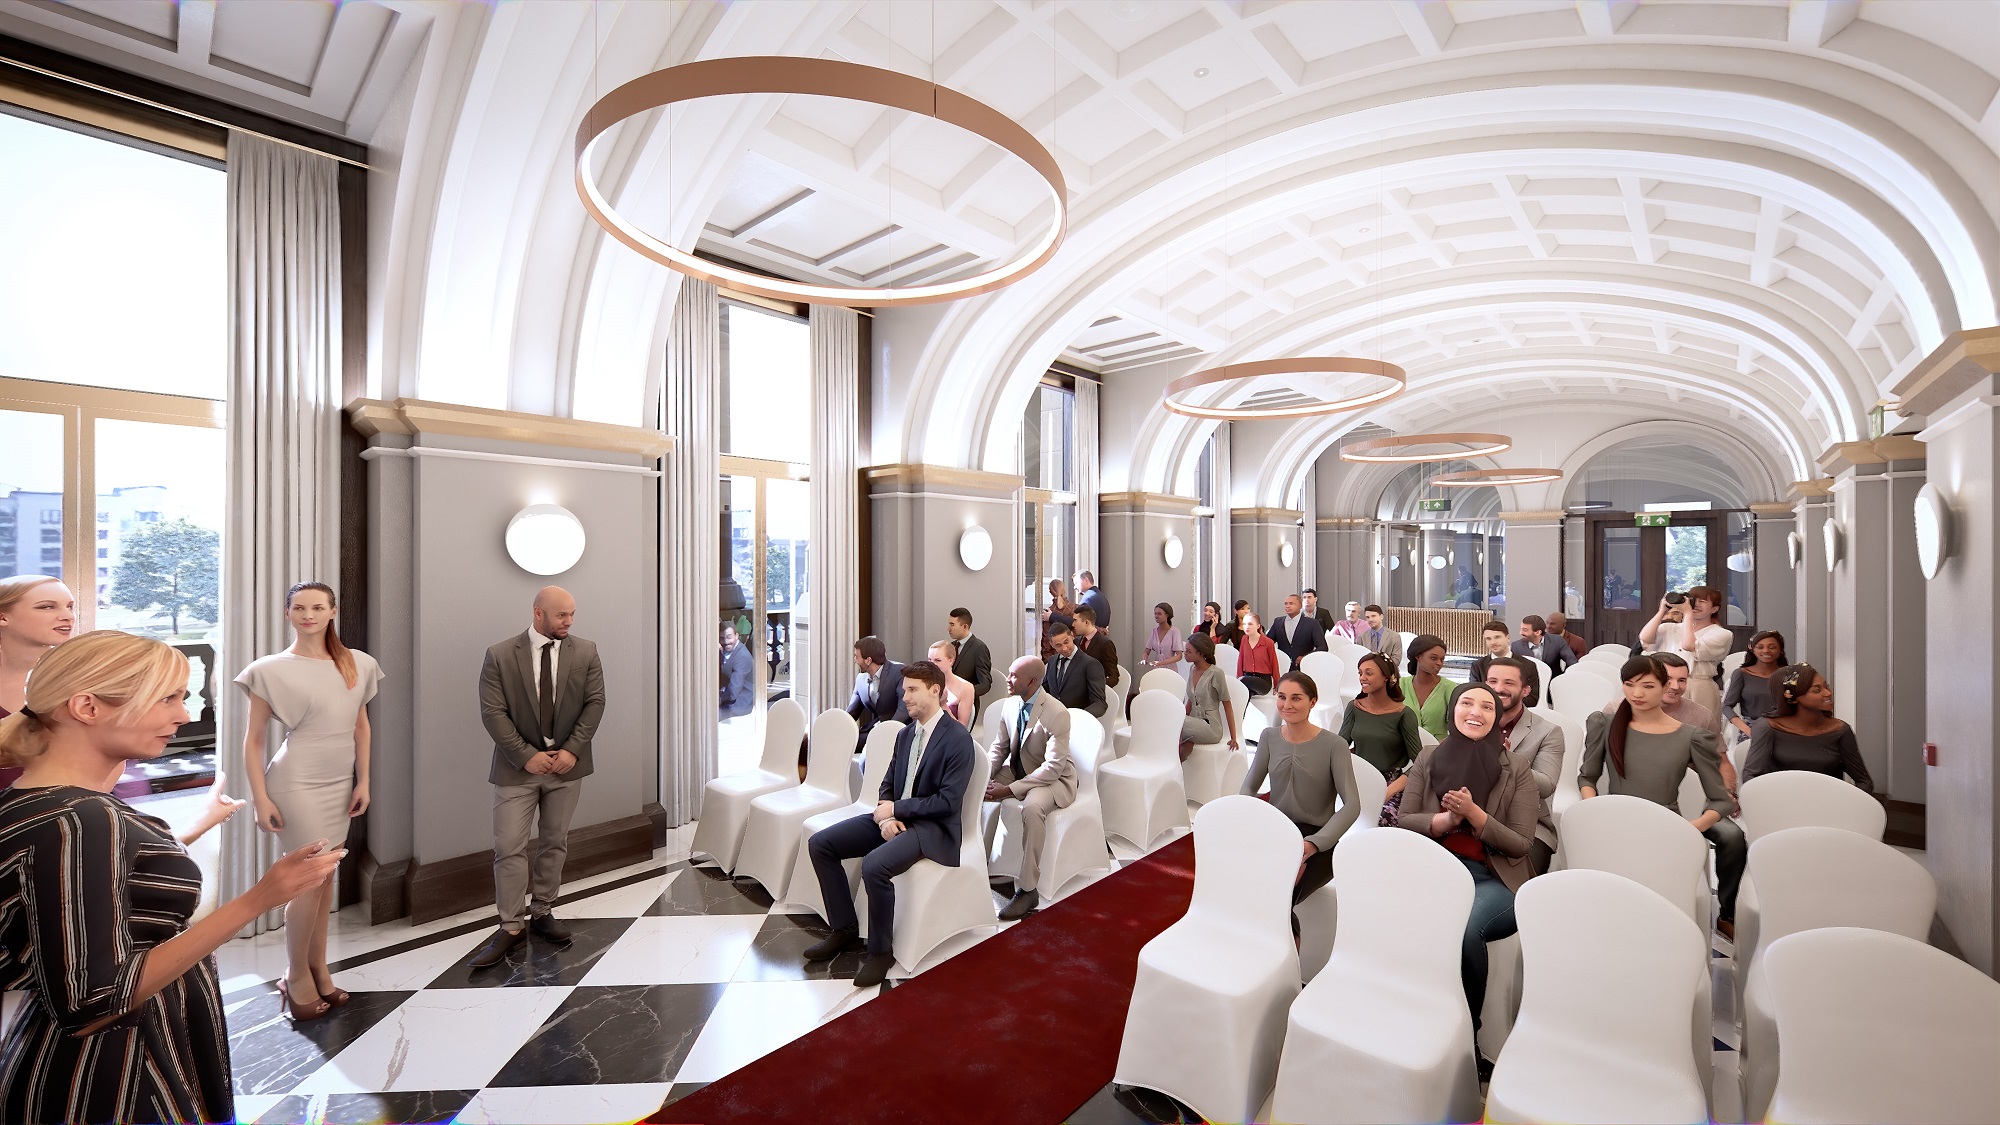 Video: First glimpse of Paisley’s A-listed town hall’s £22m transformation